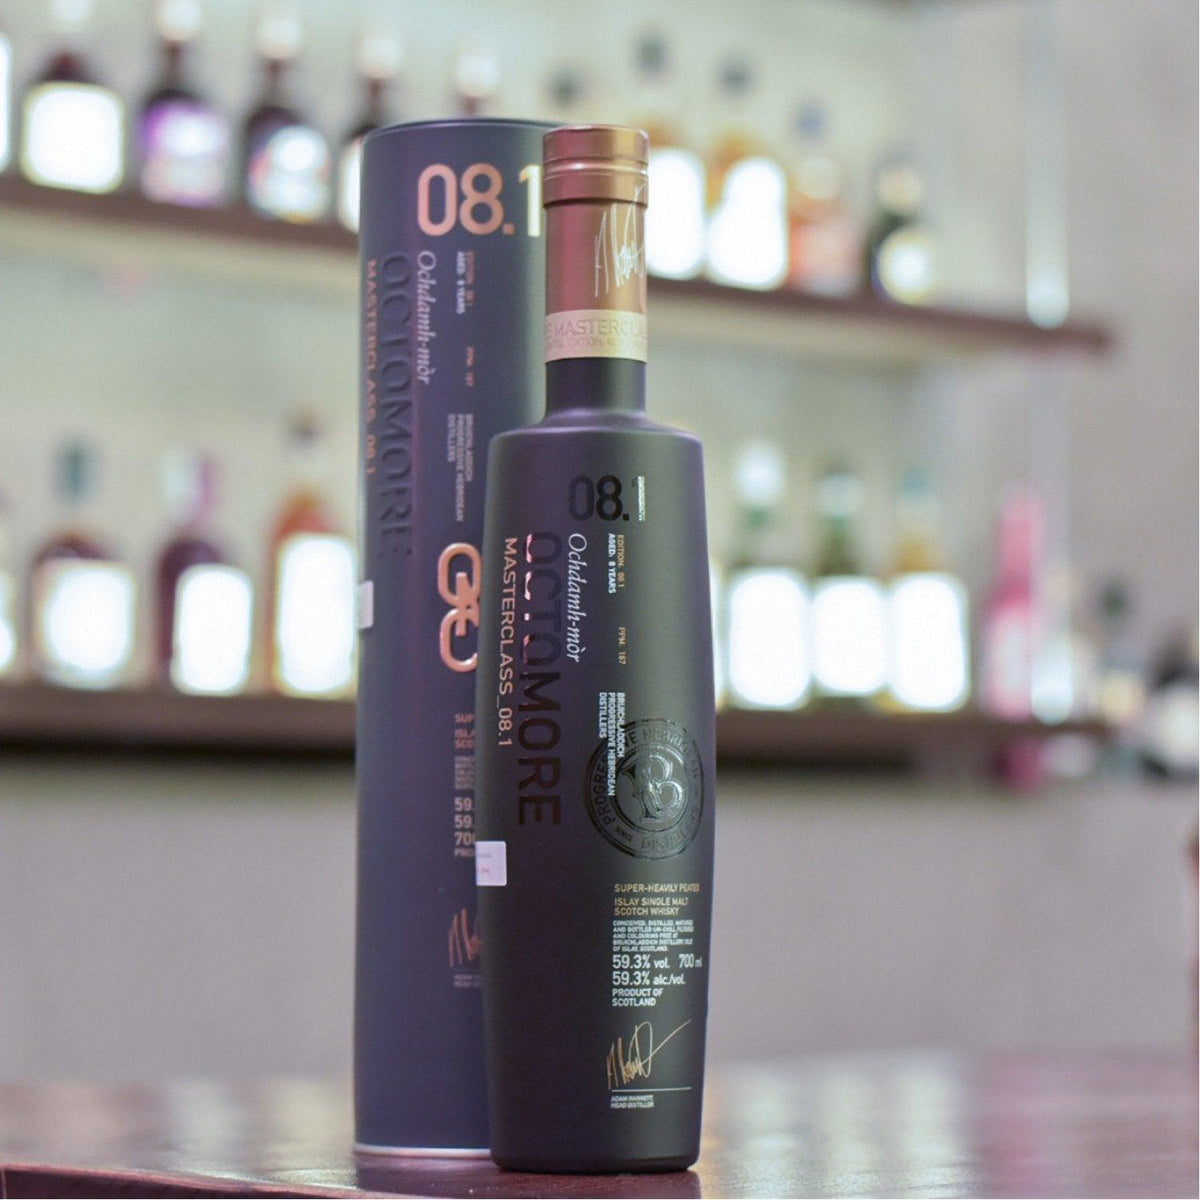 Octomore 8 Year Old Edition 8.1 - The Rare Malt